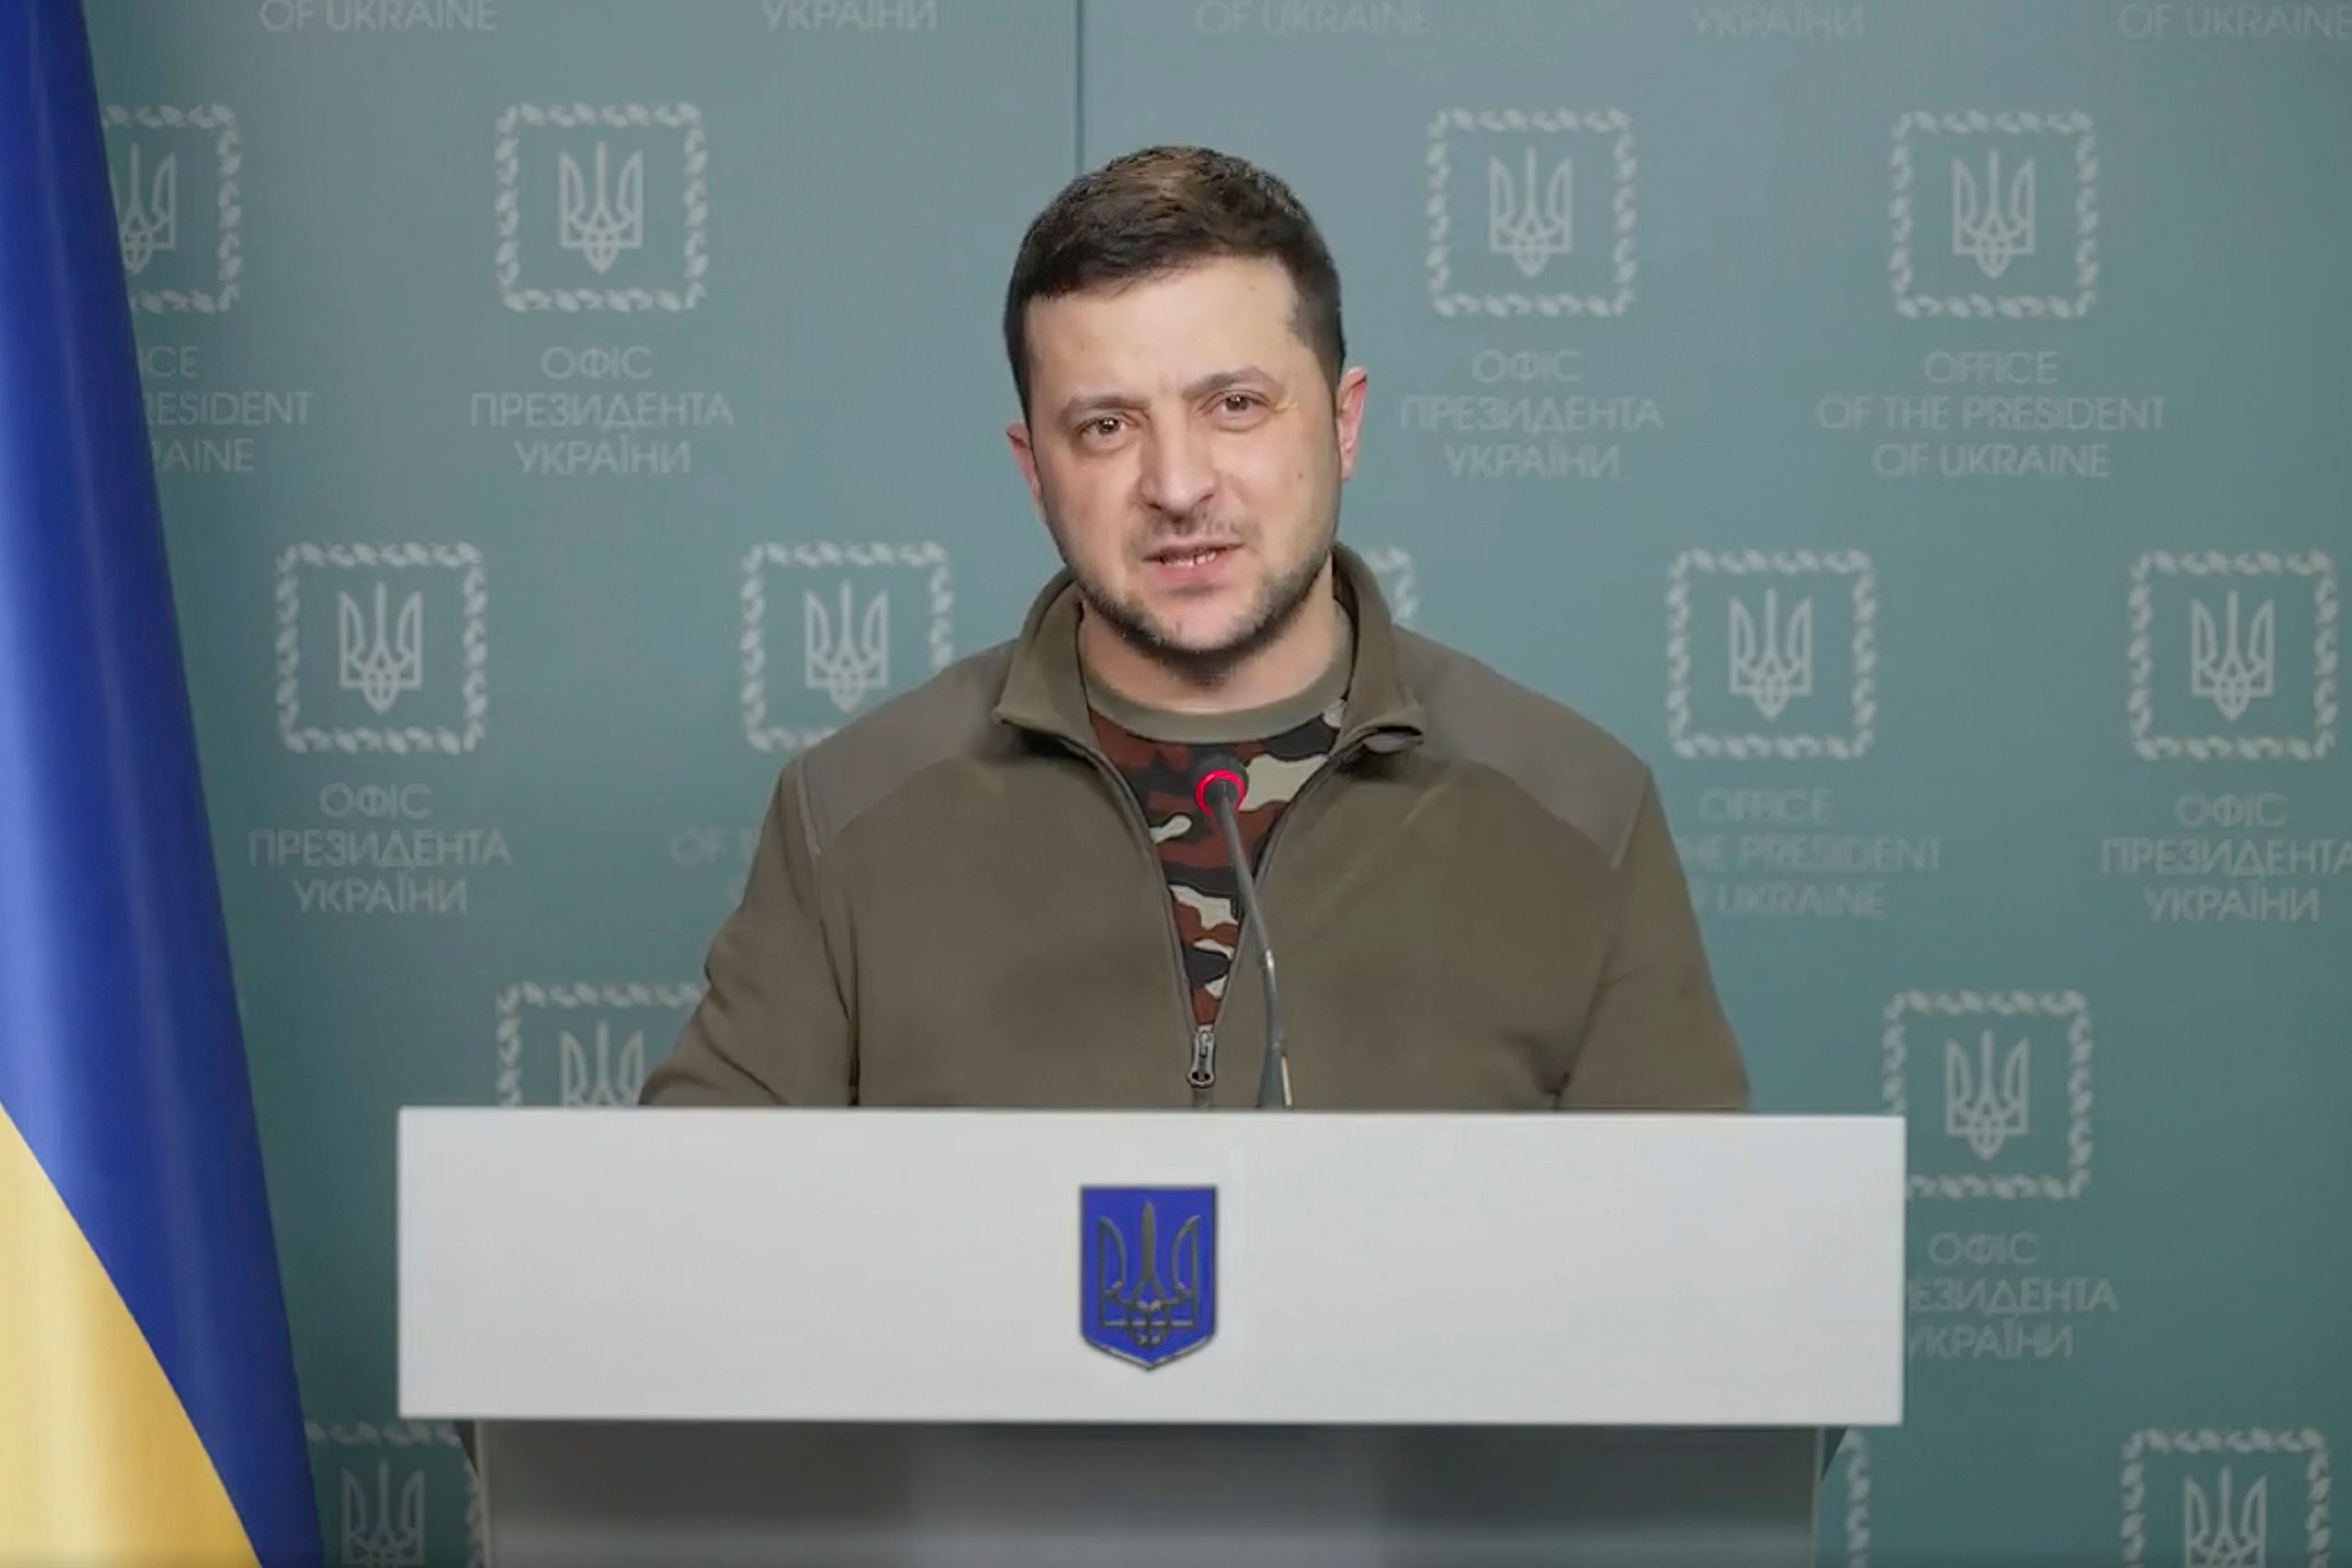 Zelensky on Russias invasion: Theres frontline everywhere in Ukrainethis is tragedy’